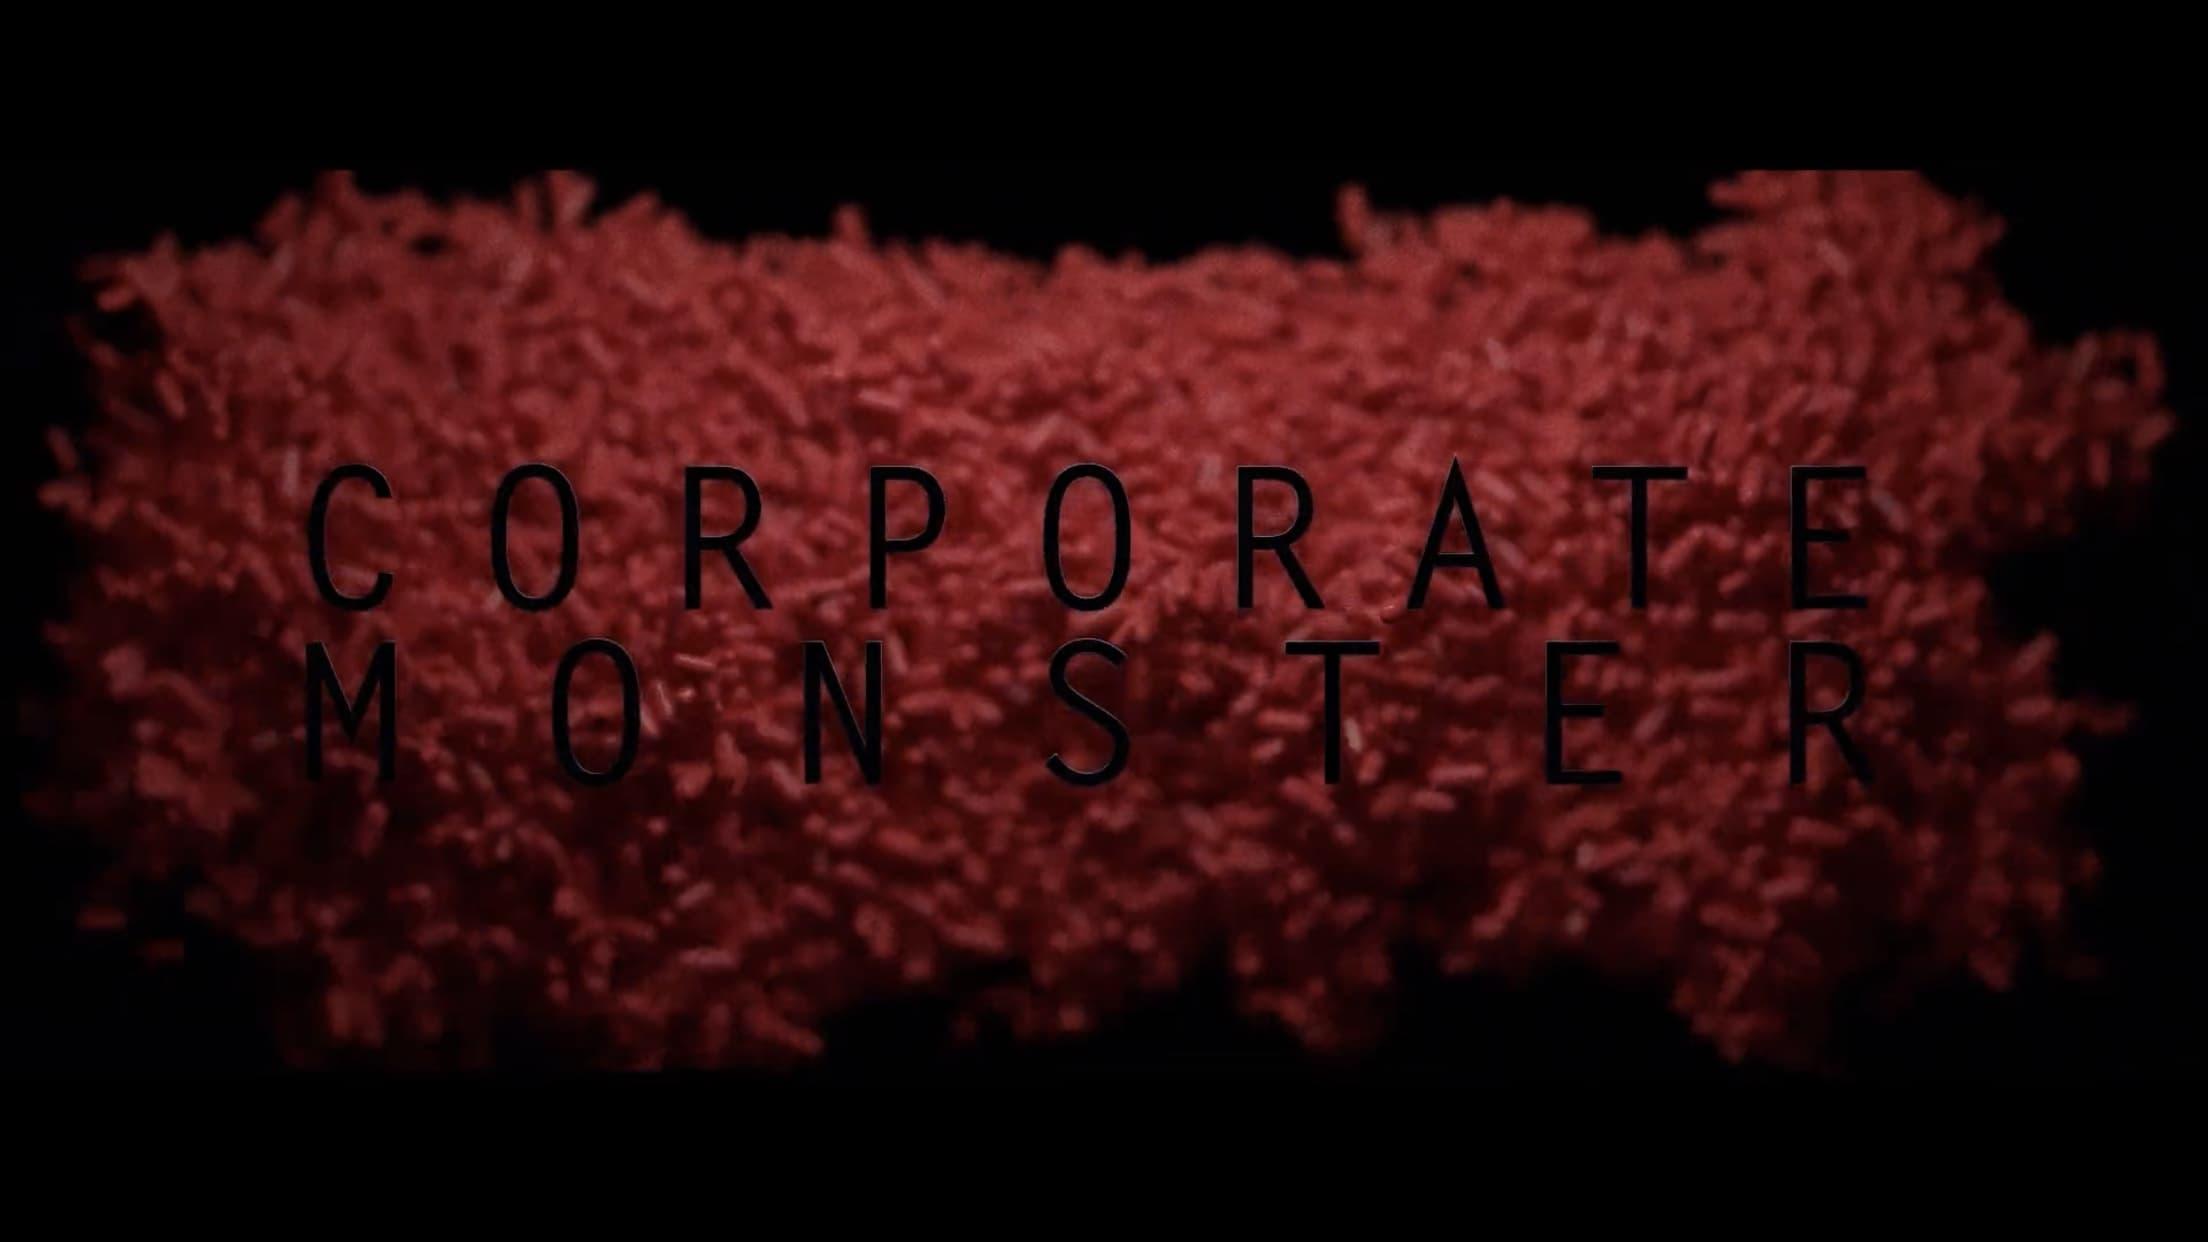 Corporate Monster backdrop